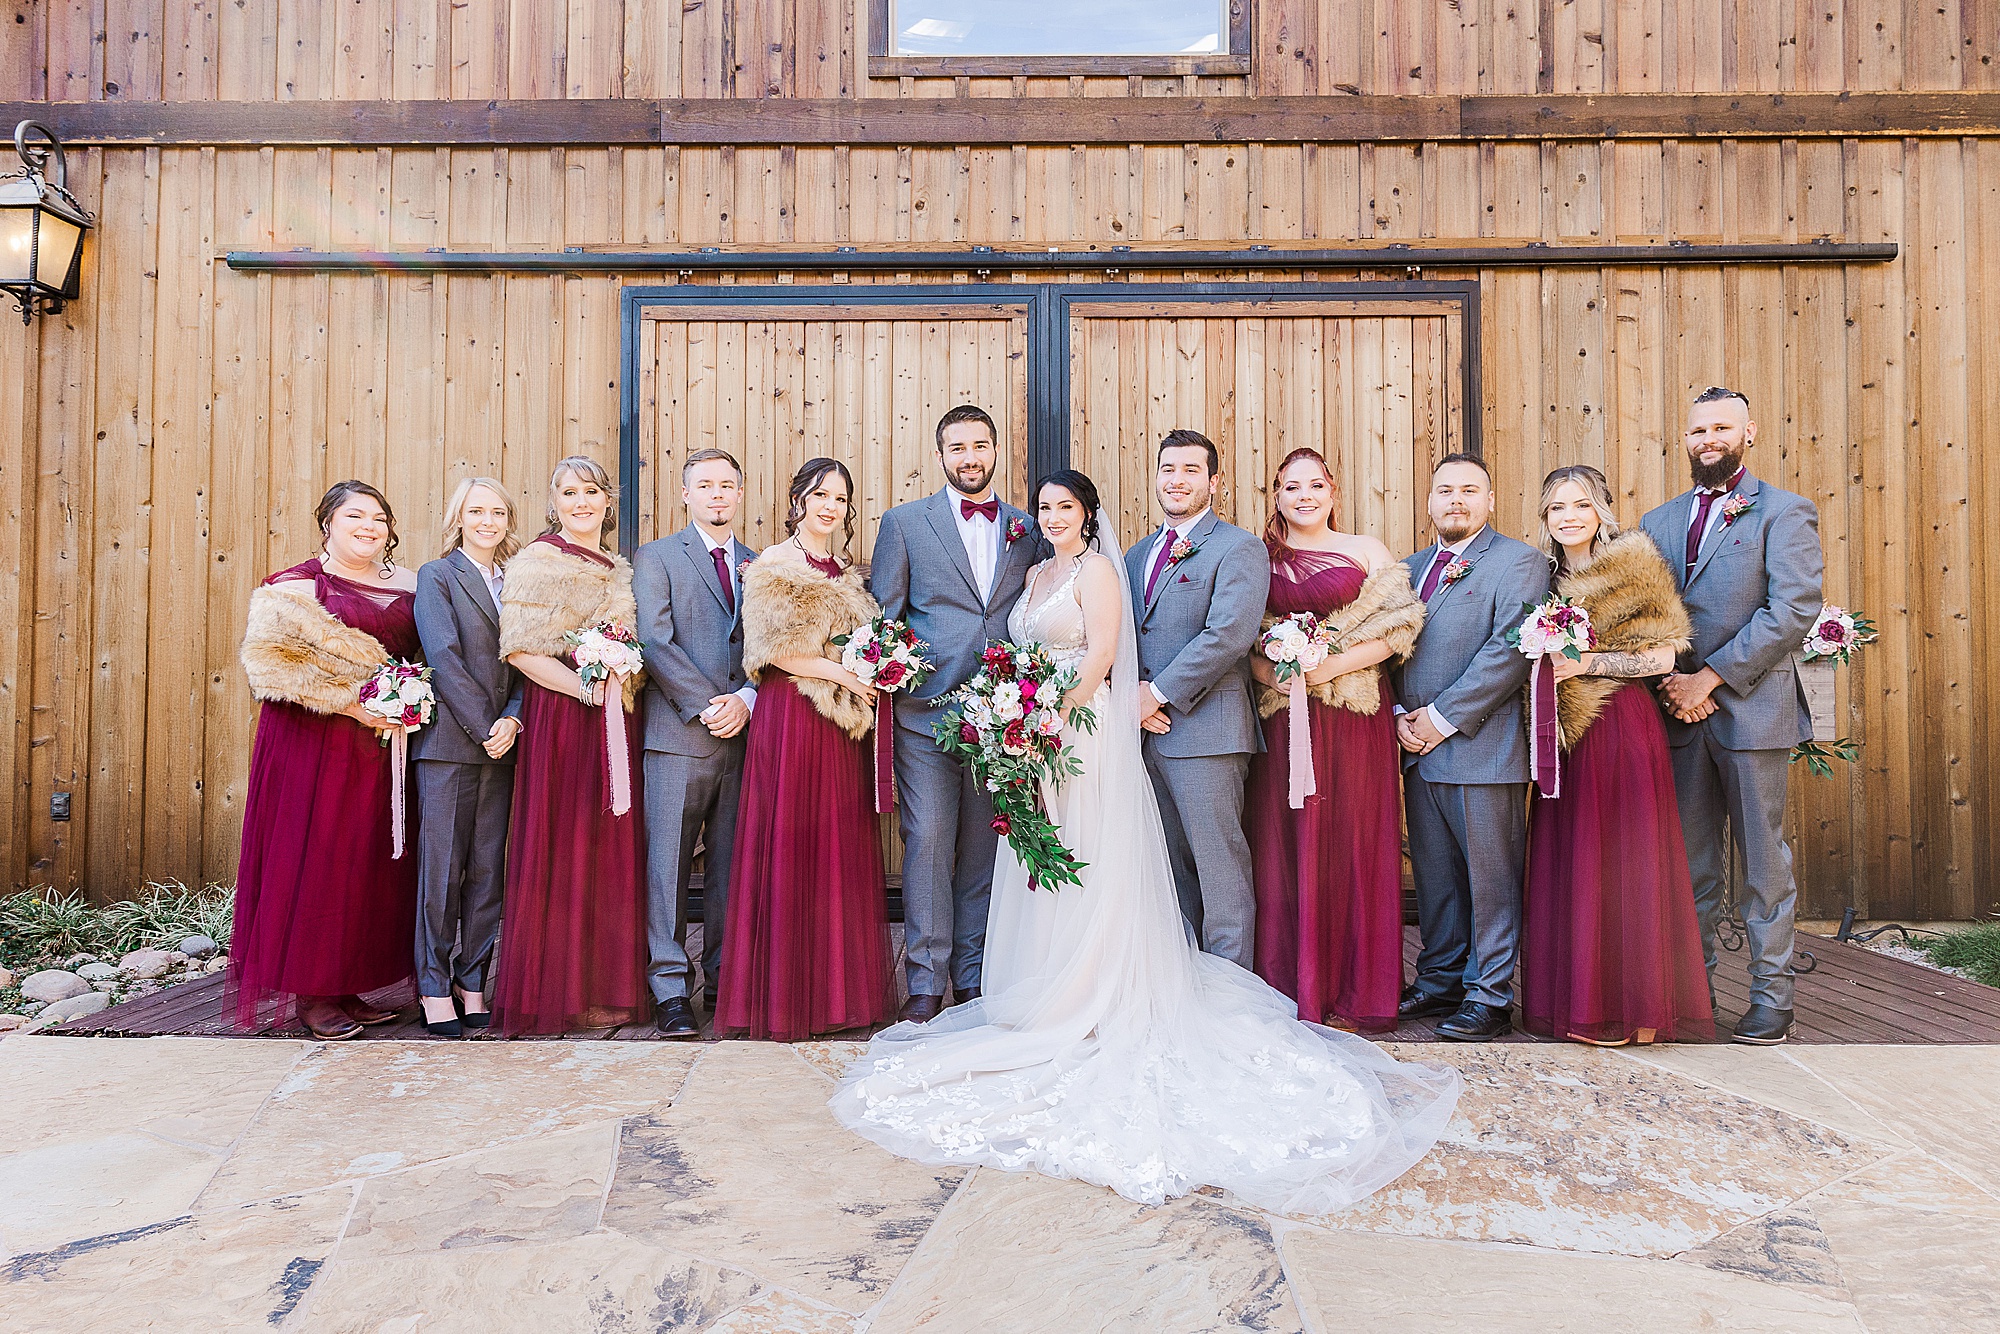 bride and groom pose with wedding party in grey and burgundy outside wooden doors